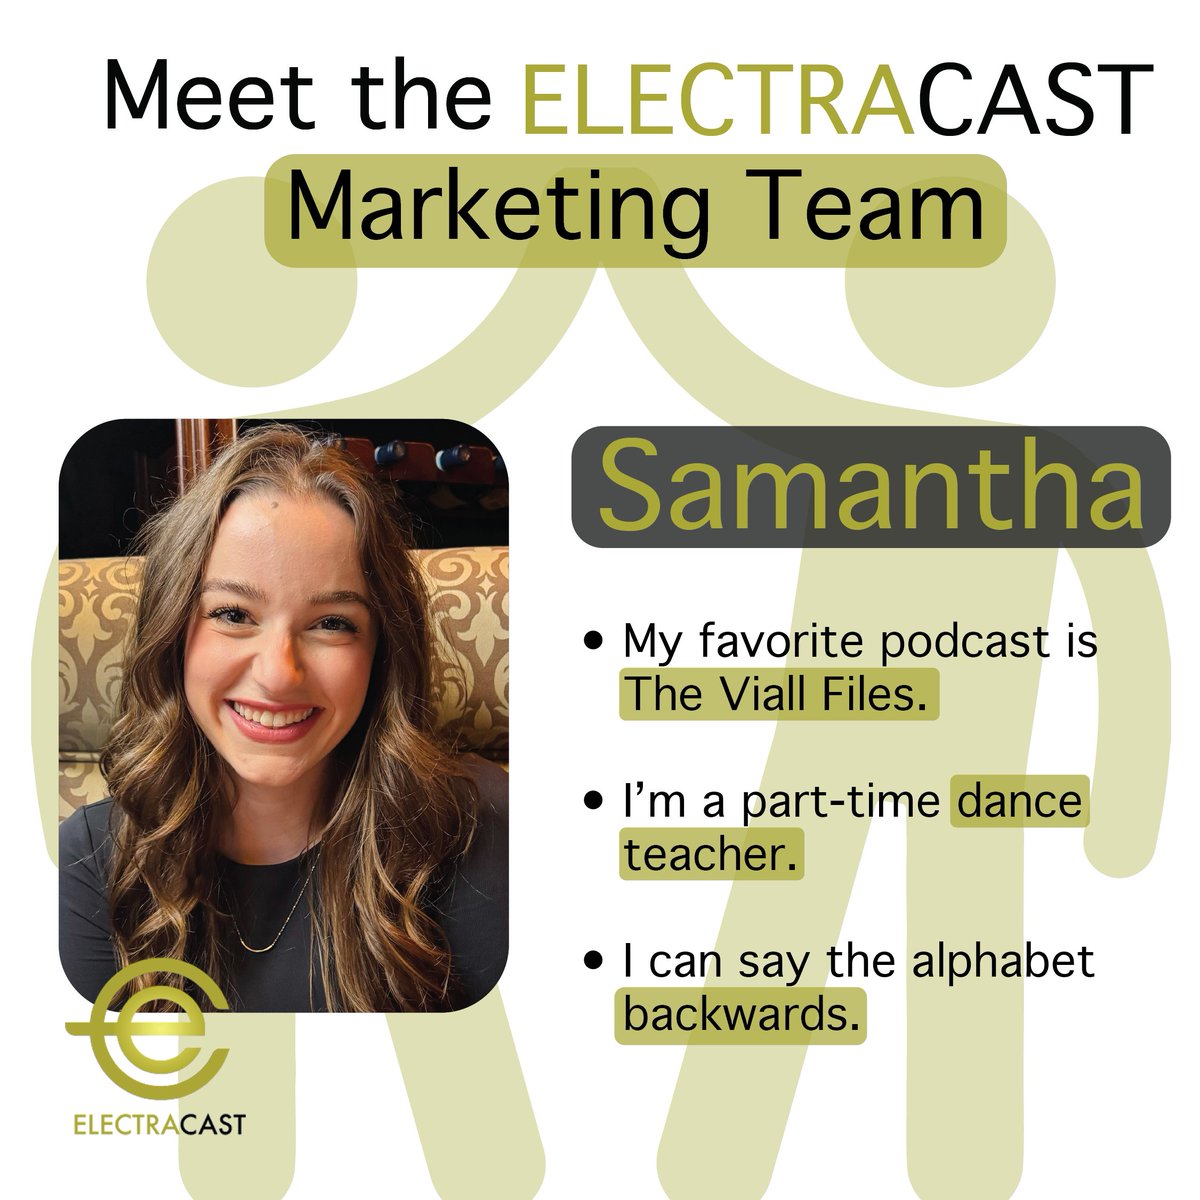 Meet our newest intern, Samantha! 📺✨ Big fan of The Viall Files and reality TV. Fun facts: She's a part-time dance teacher and can say the alphabet backwards! 🕺🔤 #WelcomeSamantha #InternIntro